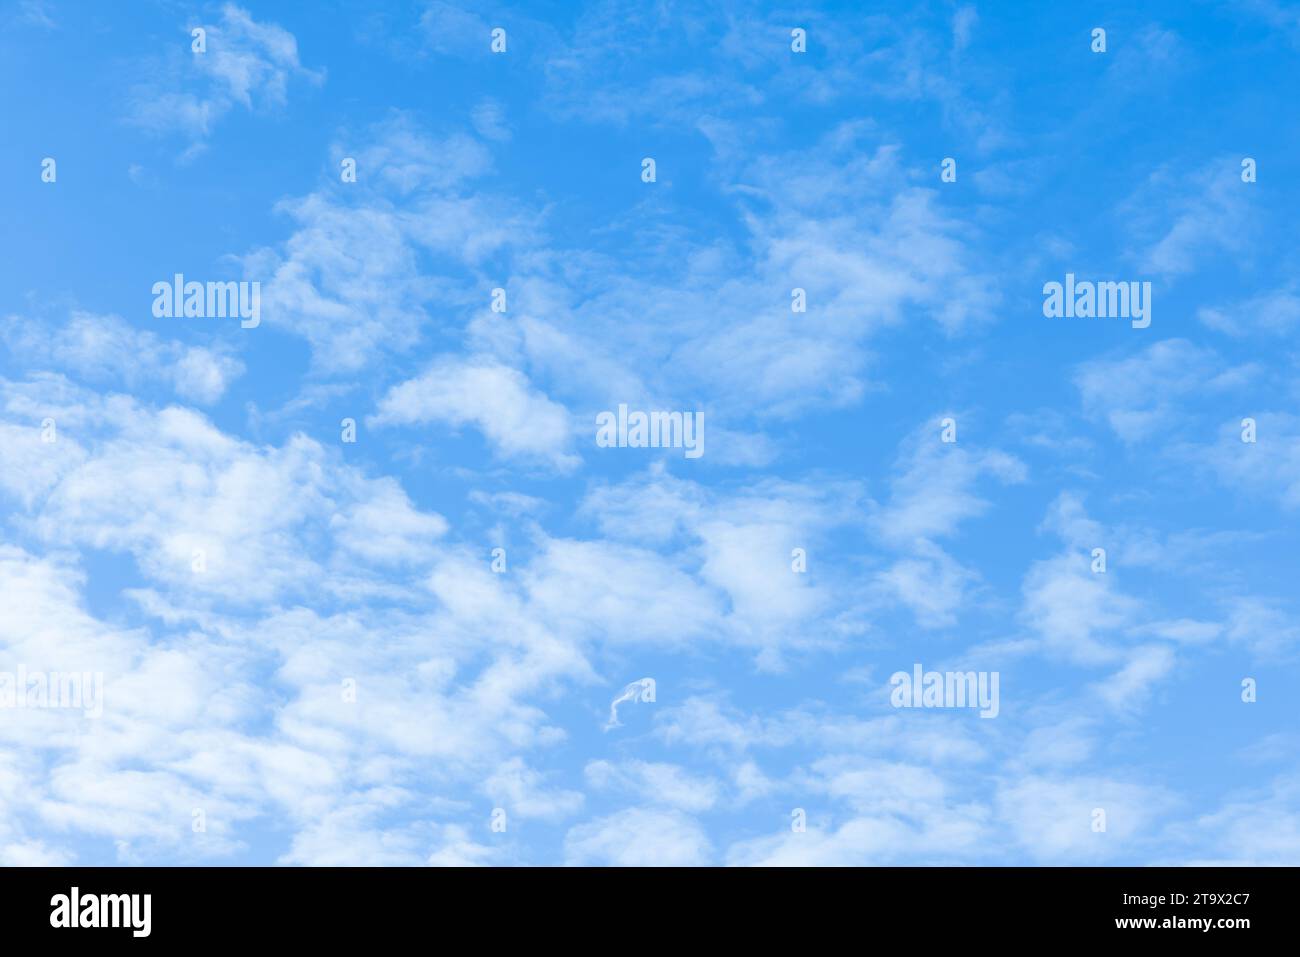 Blue sky with white altocumulus clouds pattern on a sunny day, natural background photo texture Stock Photo